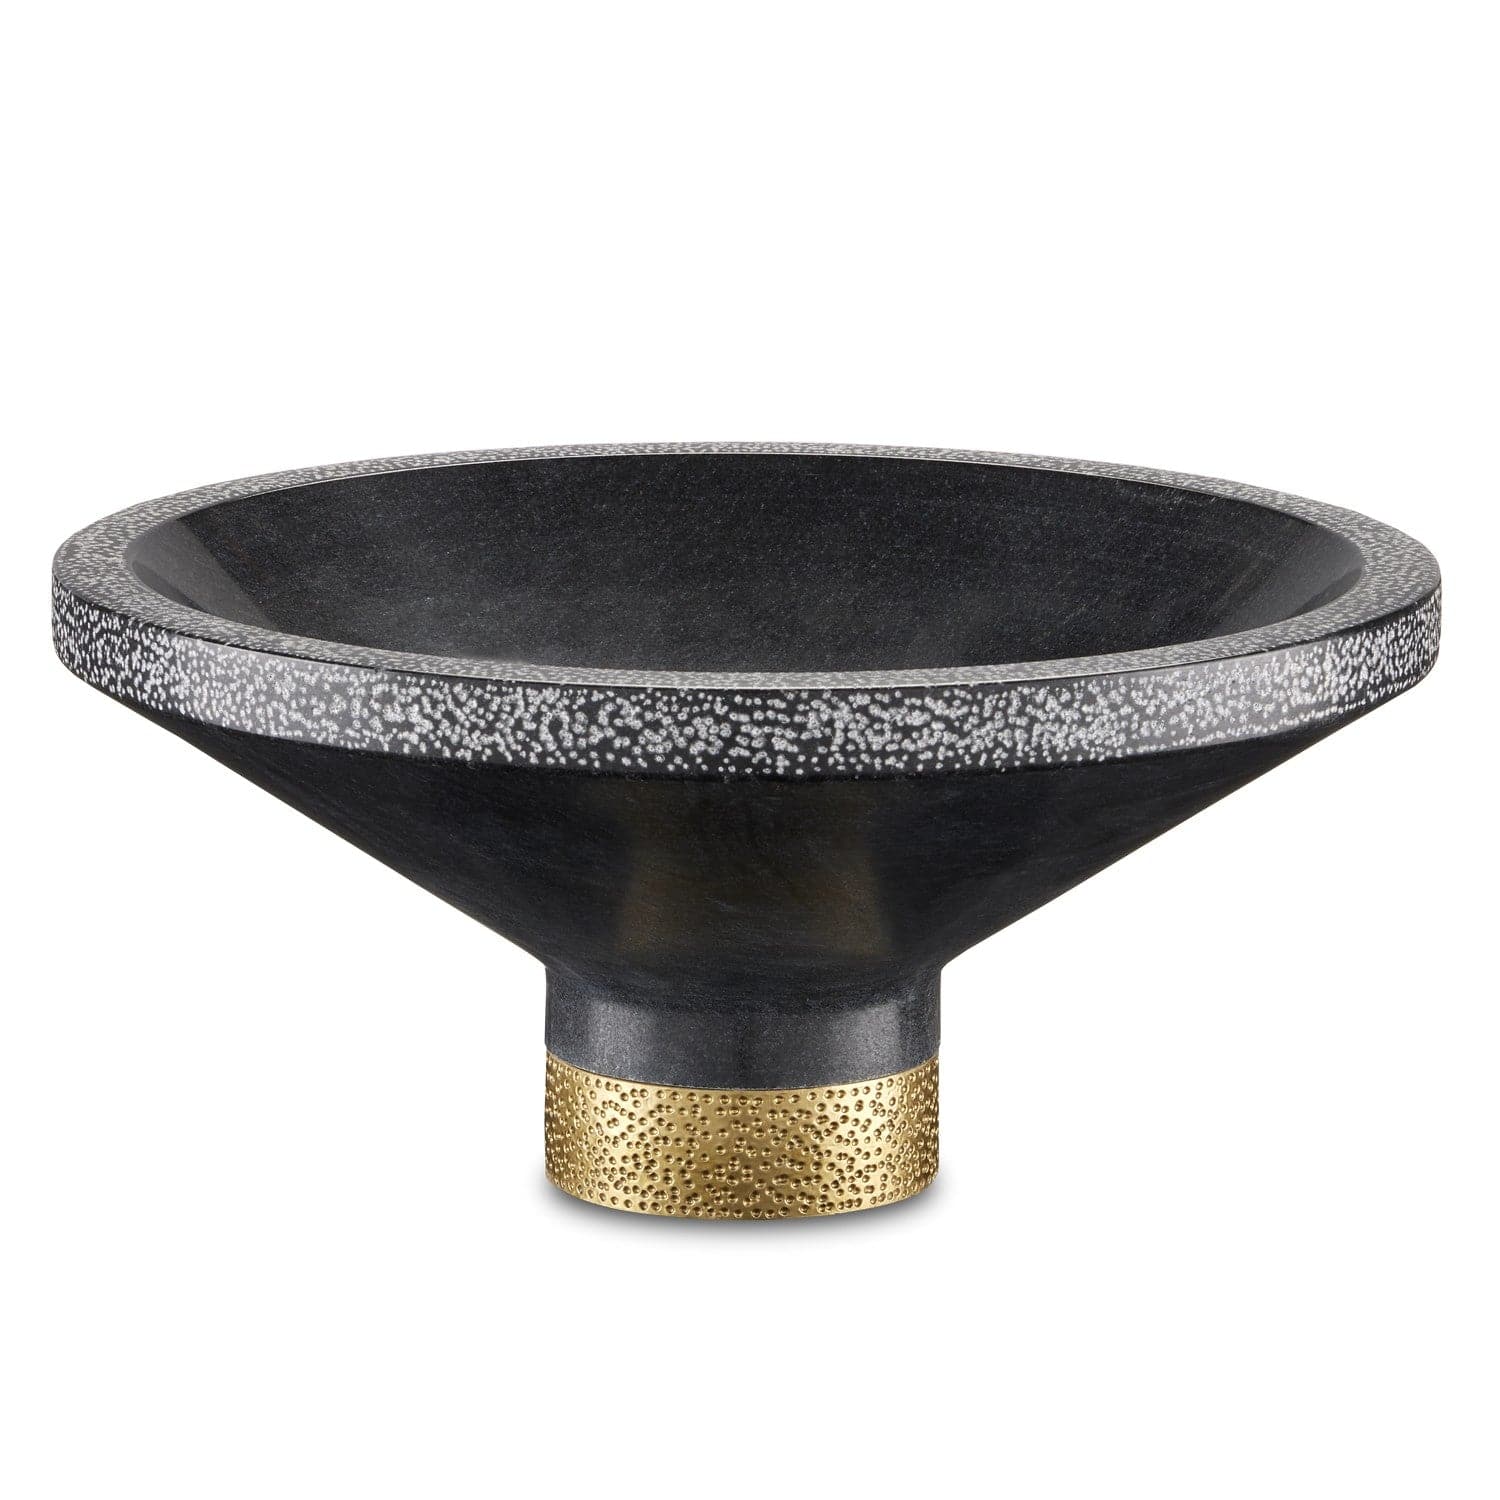 Currey and Company - 1200-0659 - Bowl - Black/Brass